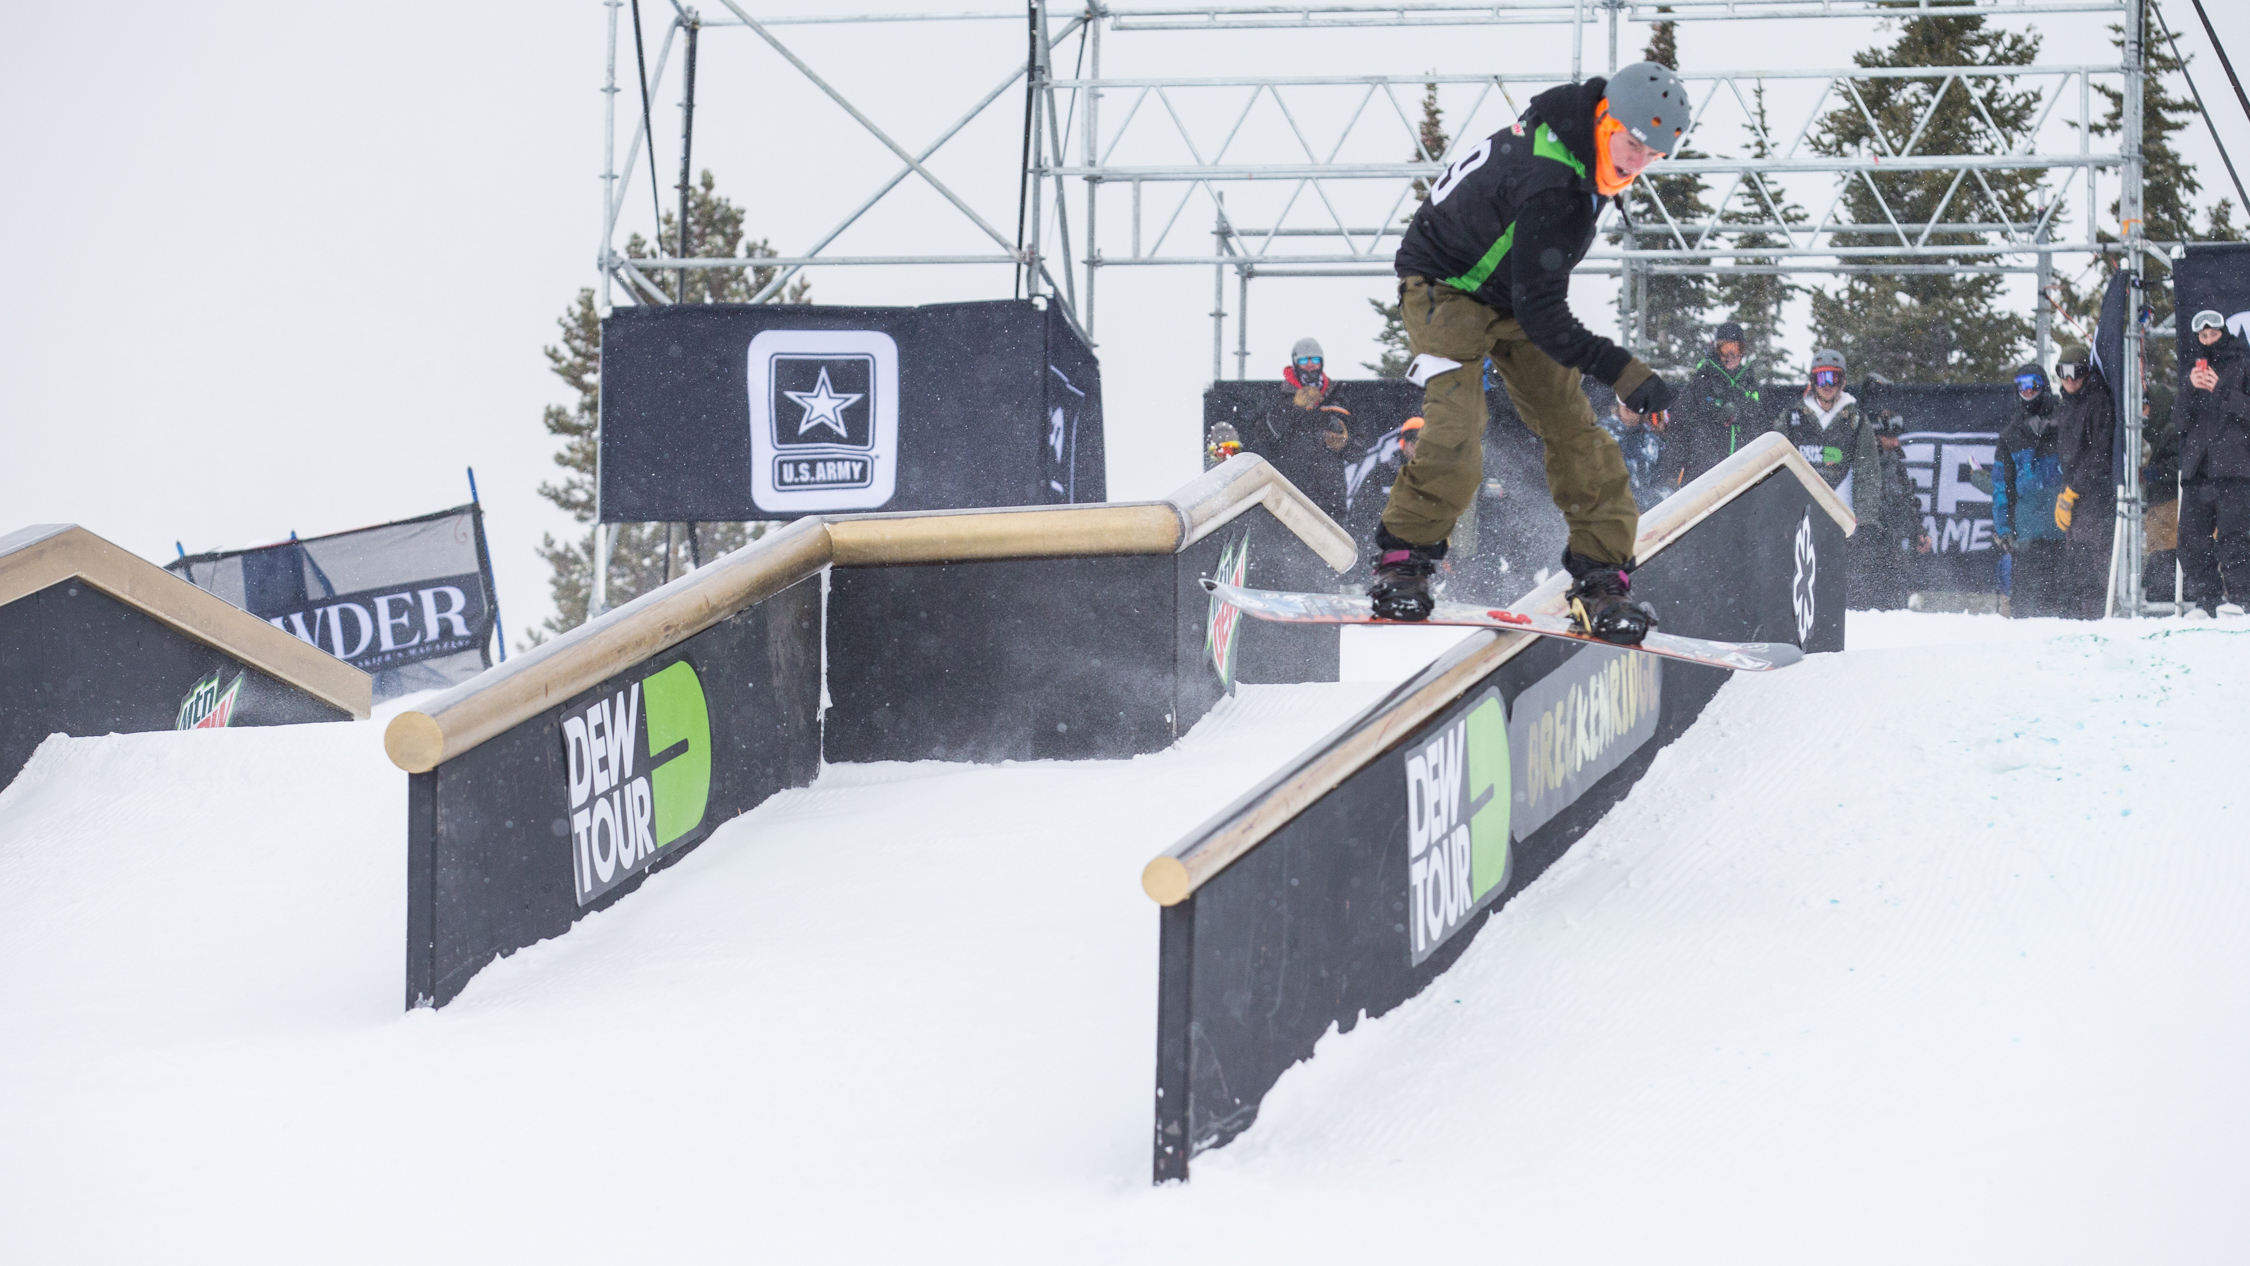 Reid_smith_dew_tour_breck_snb_slope_jib_section_kanights_01